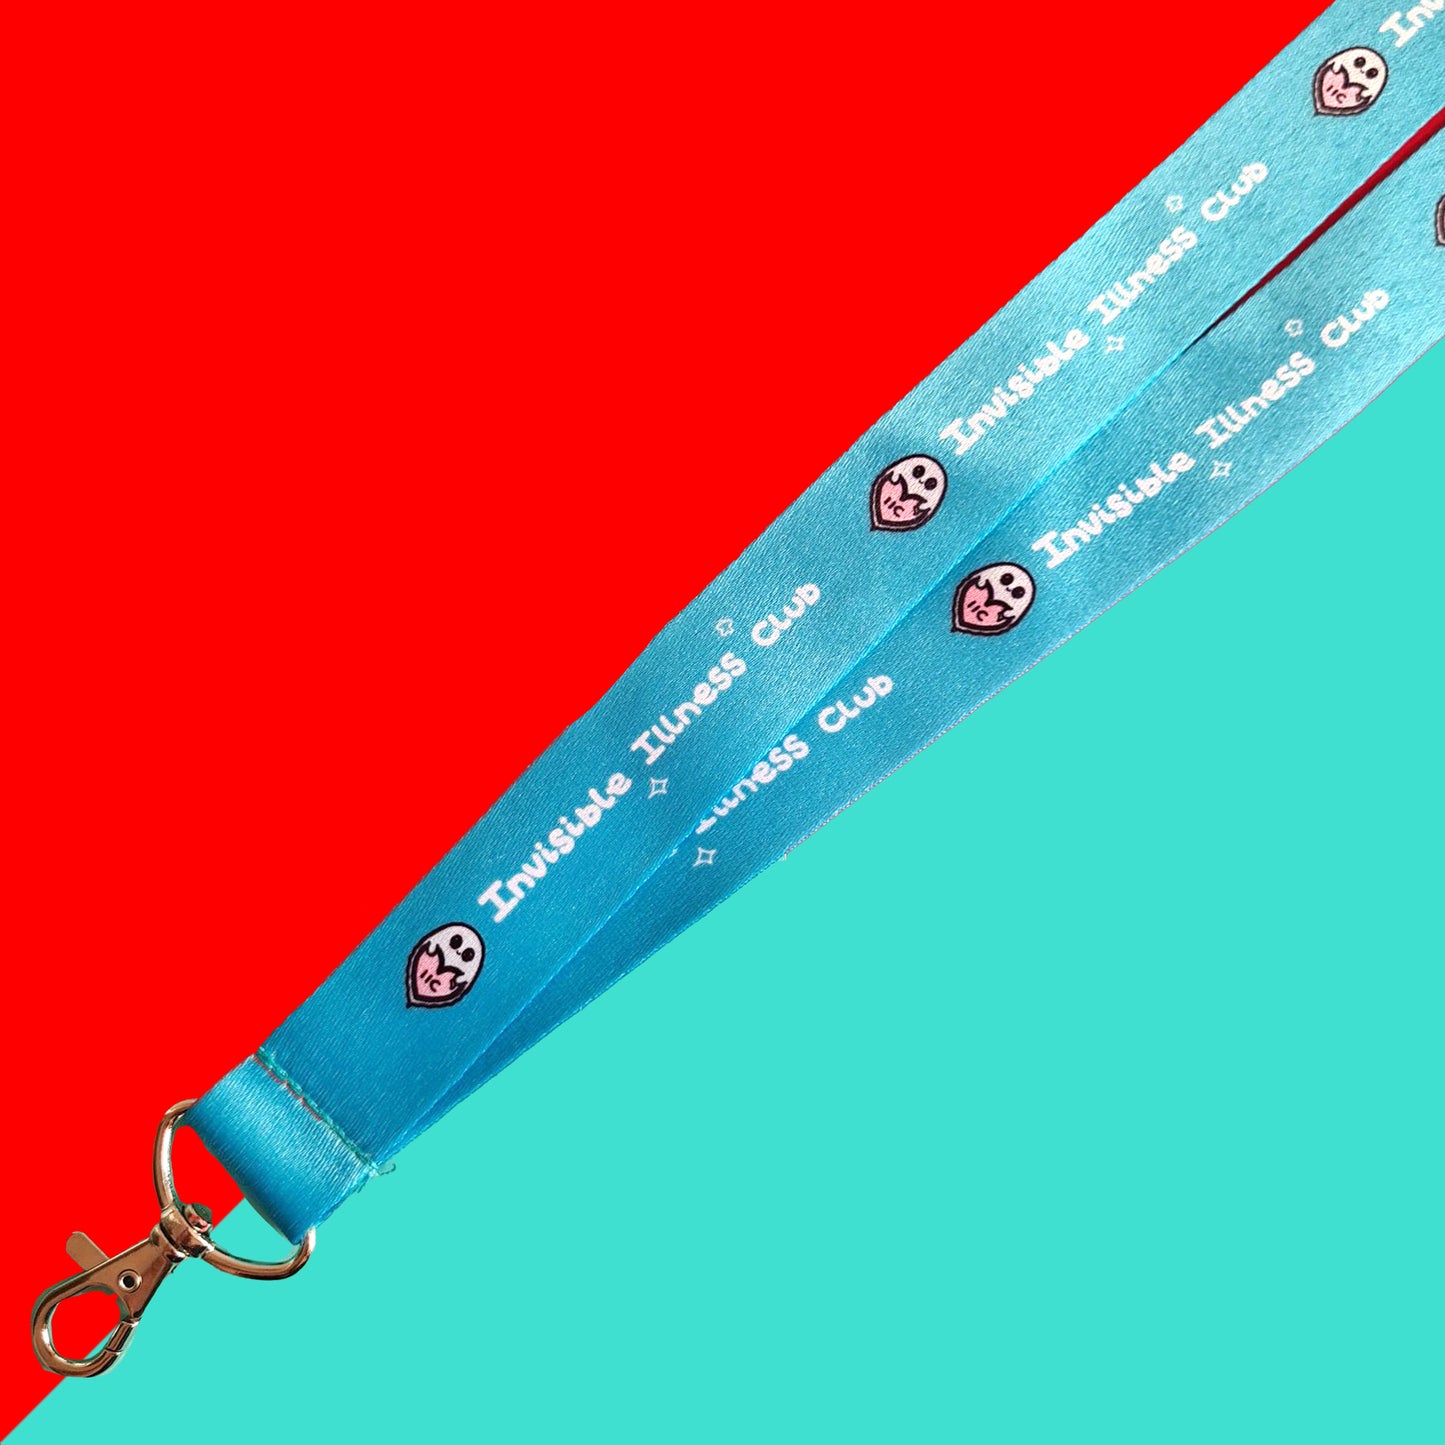 The Invisible Illness Club Lanyard on a red and blue background. The pastel blue lanyard has repeating white text reading 'invisible illness club' and innabox pastel ghost logo. It has a silver lobster clip and white safety break. The hand drawn design is raising awareness for hidden disabilities.